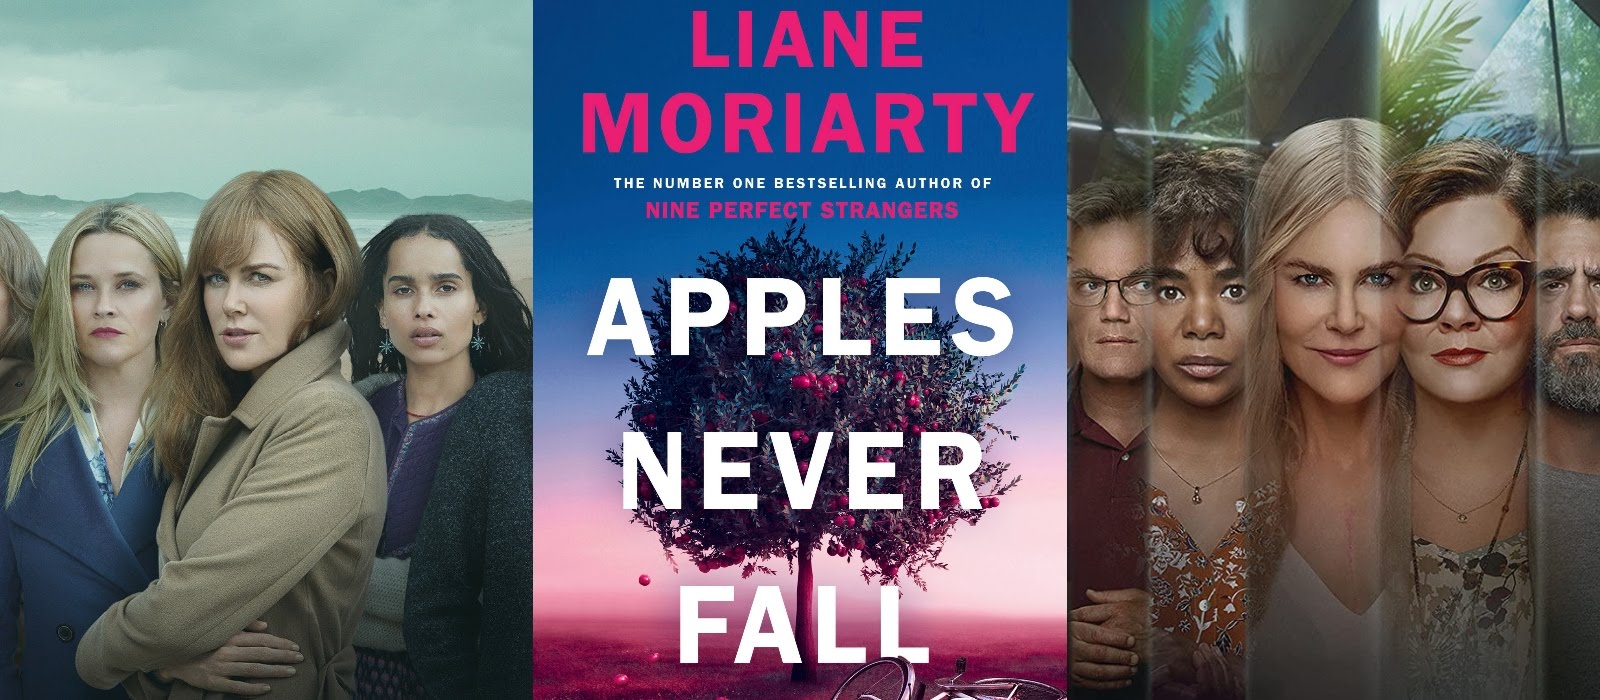 Liane Moriarty has a new mystery book for your book club